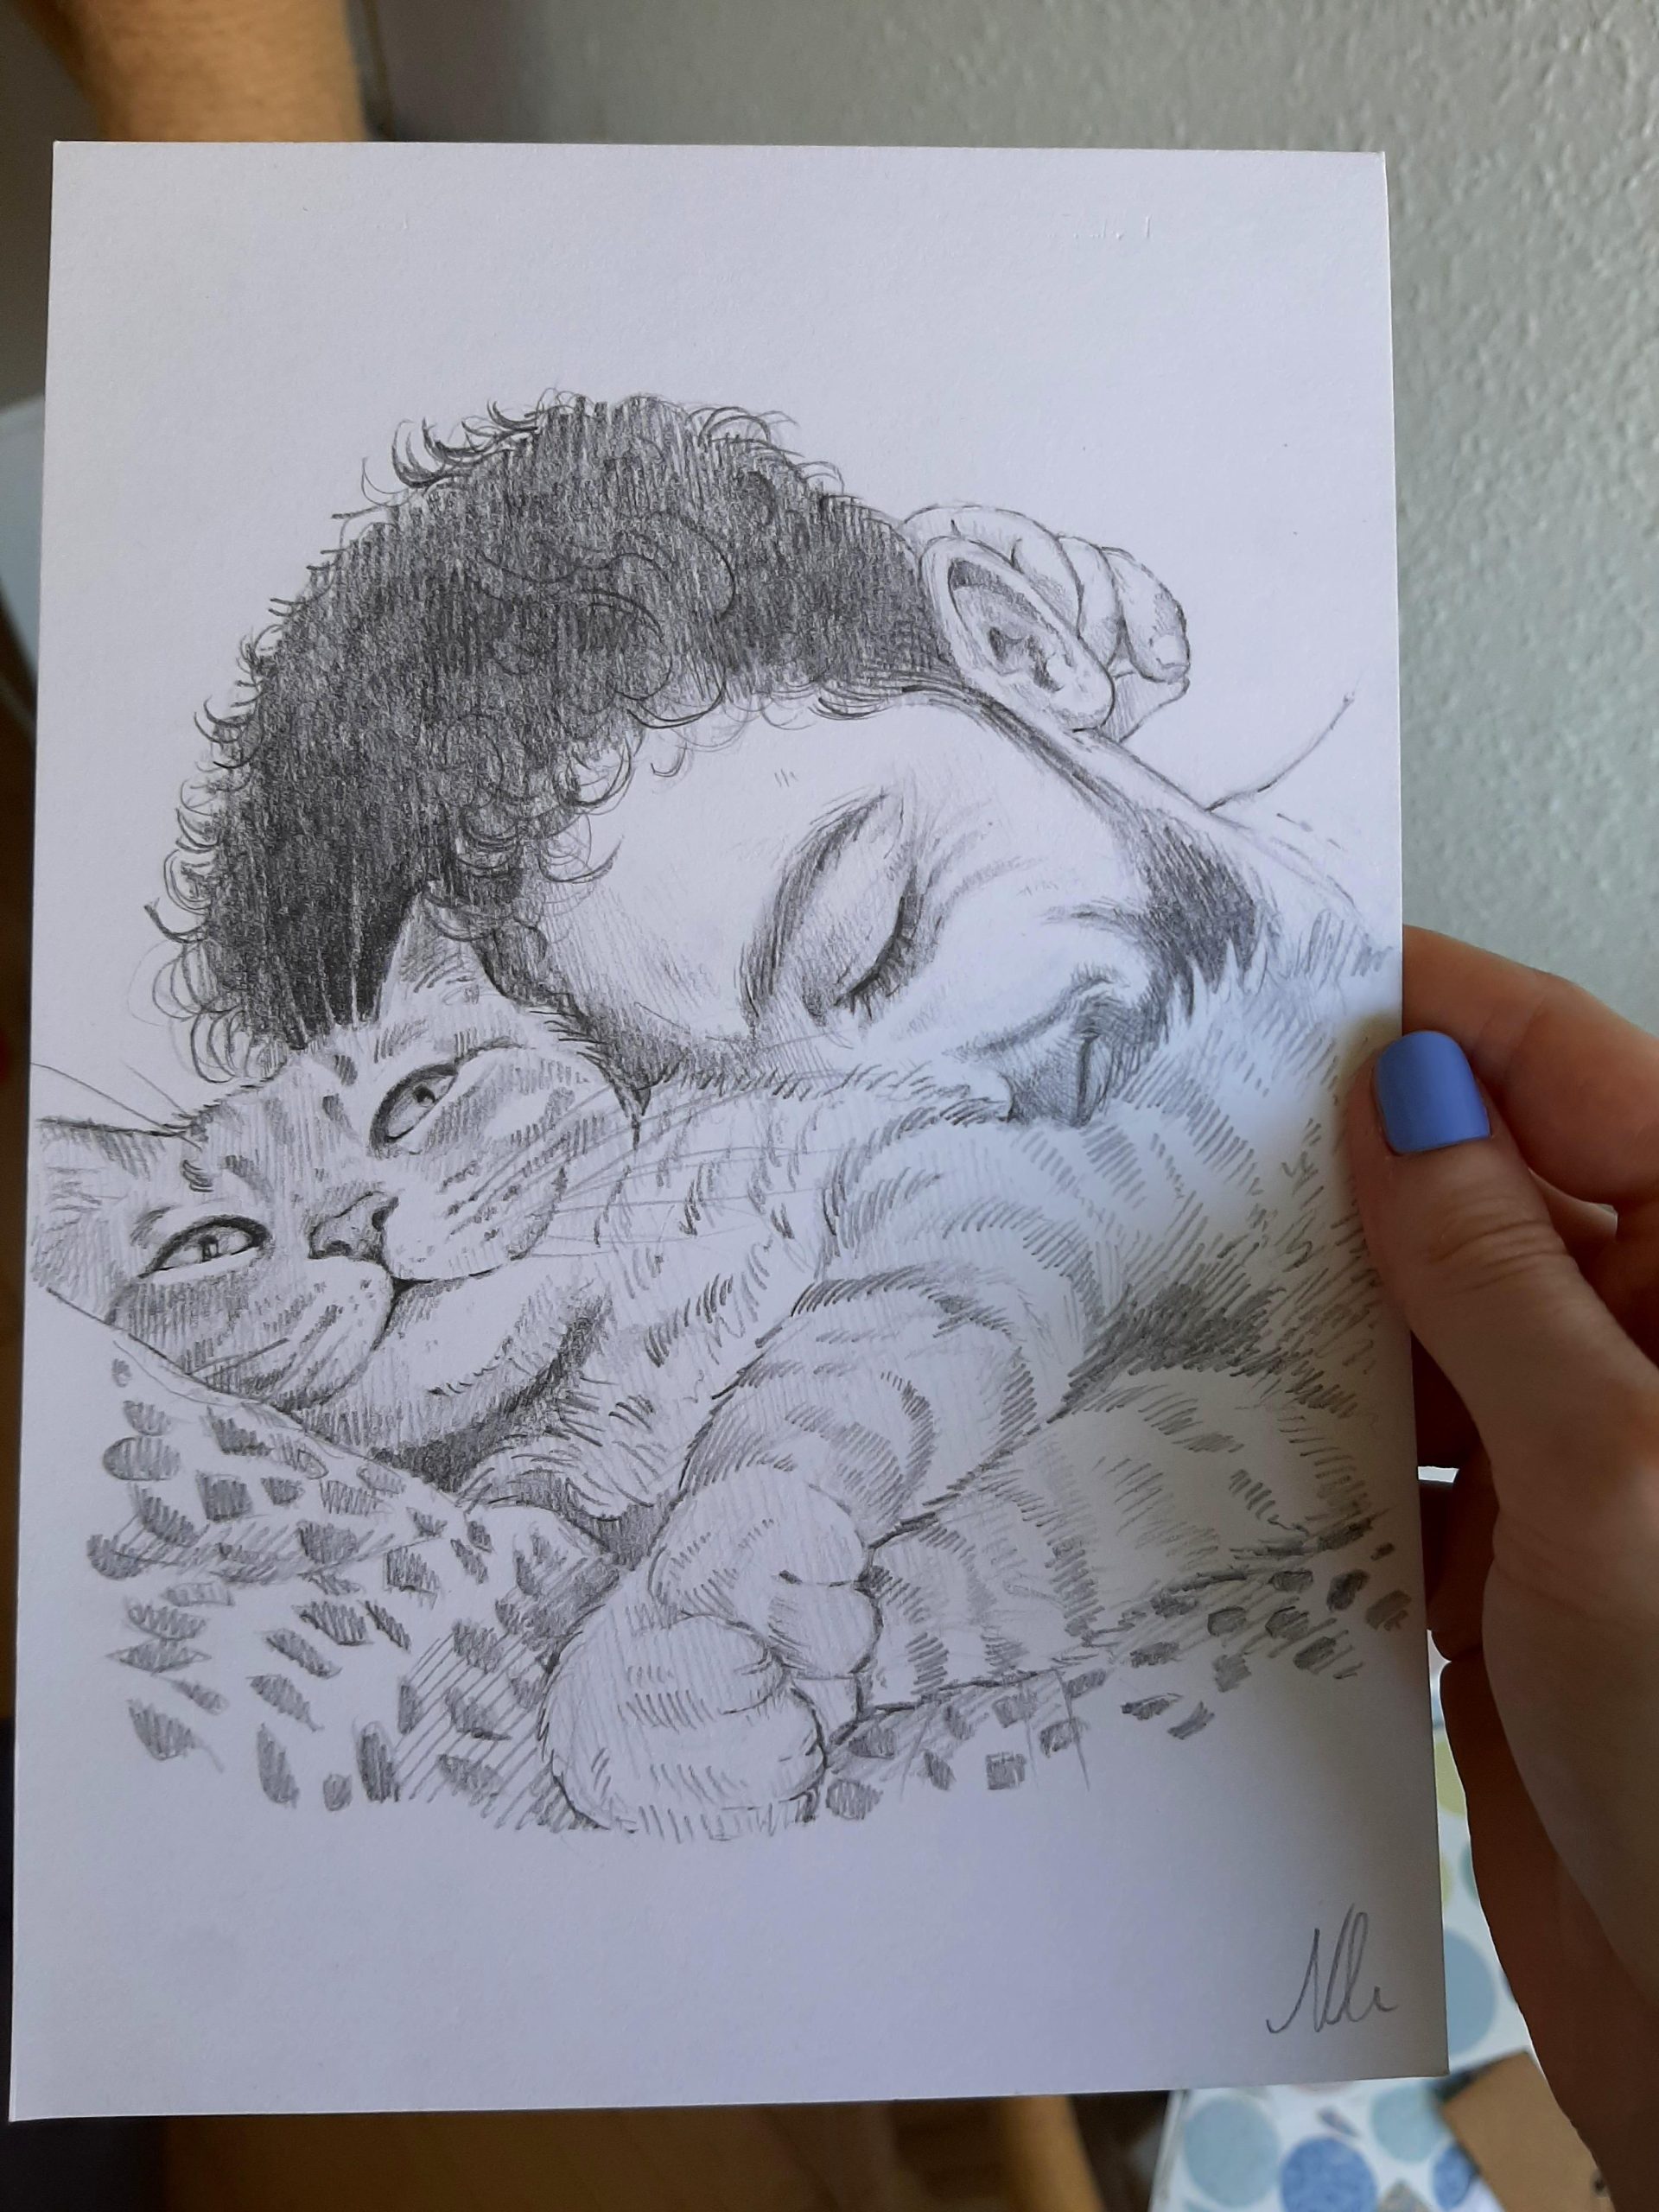 Conversations with a cat, drawn in pencil